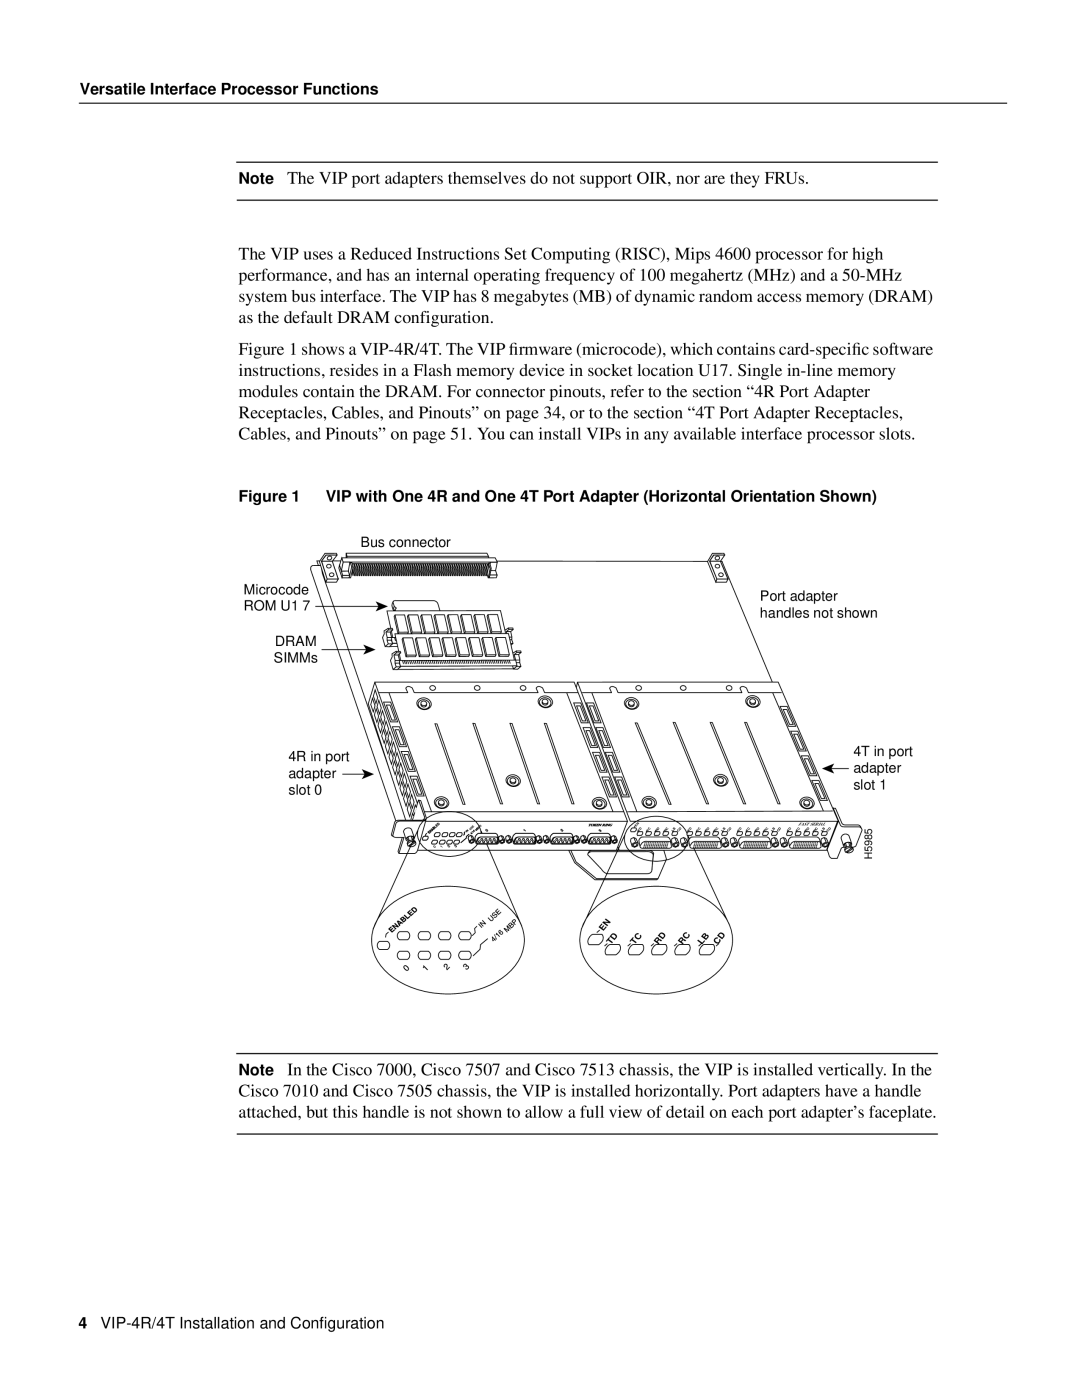 Cisco Systems manual VIP-4R/4T Installation and Conﬁguration, H5985 